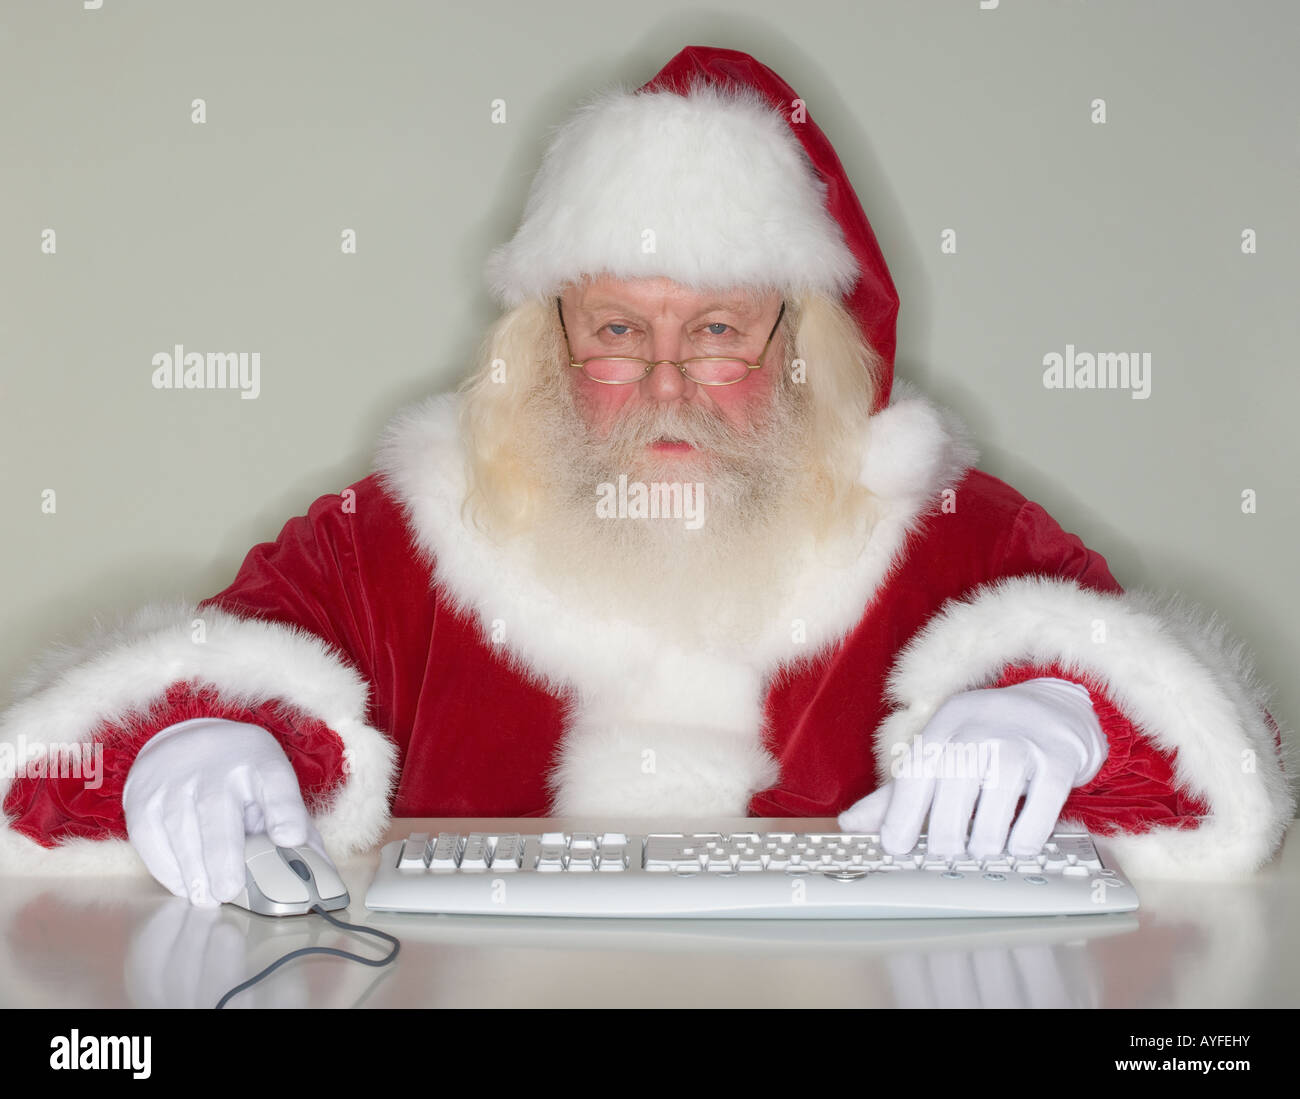 Santa Claus typing on computer Banque D'Images